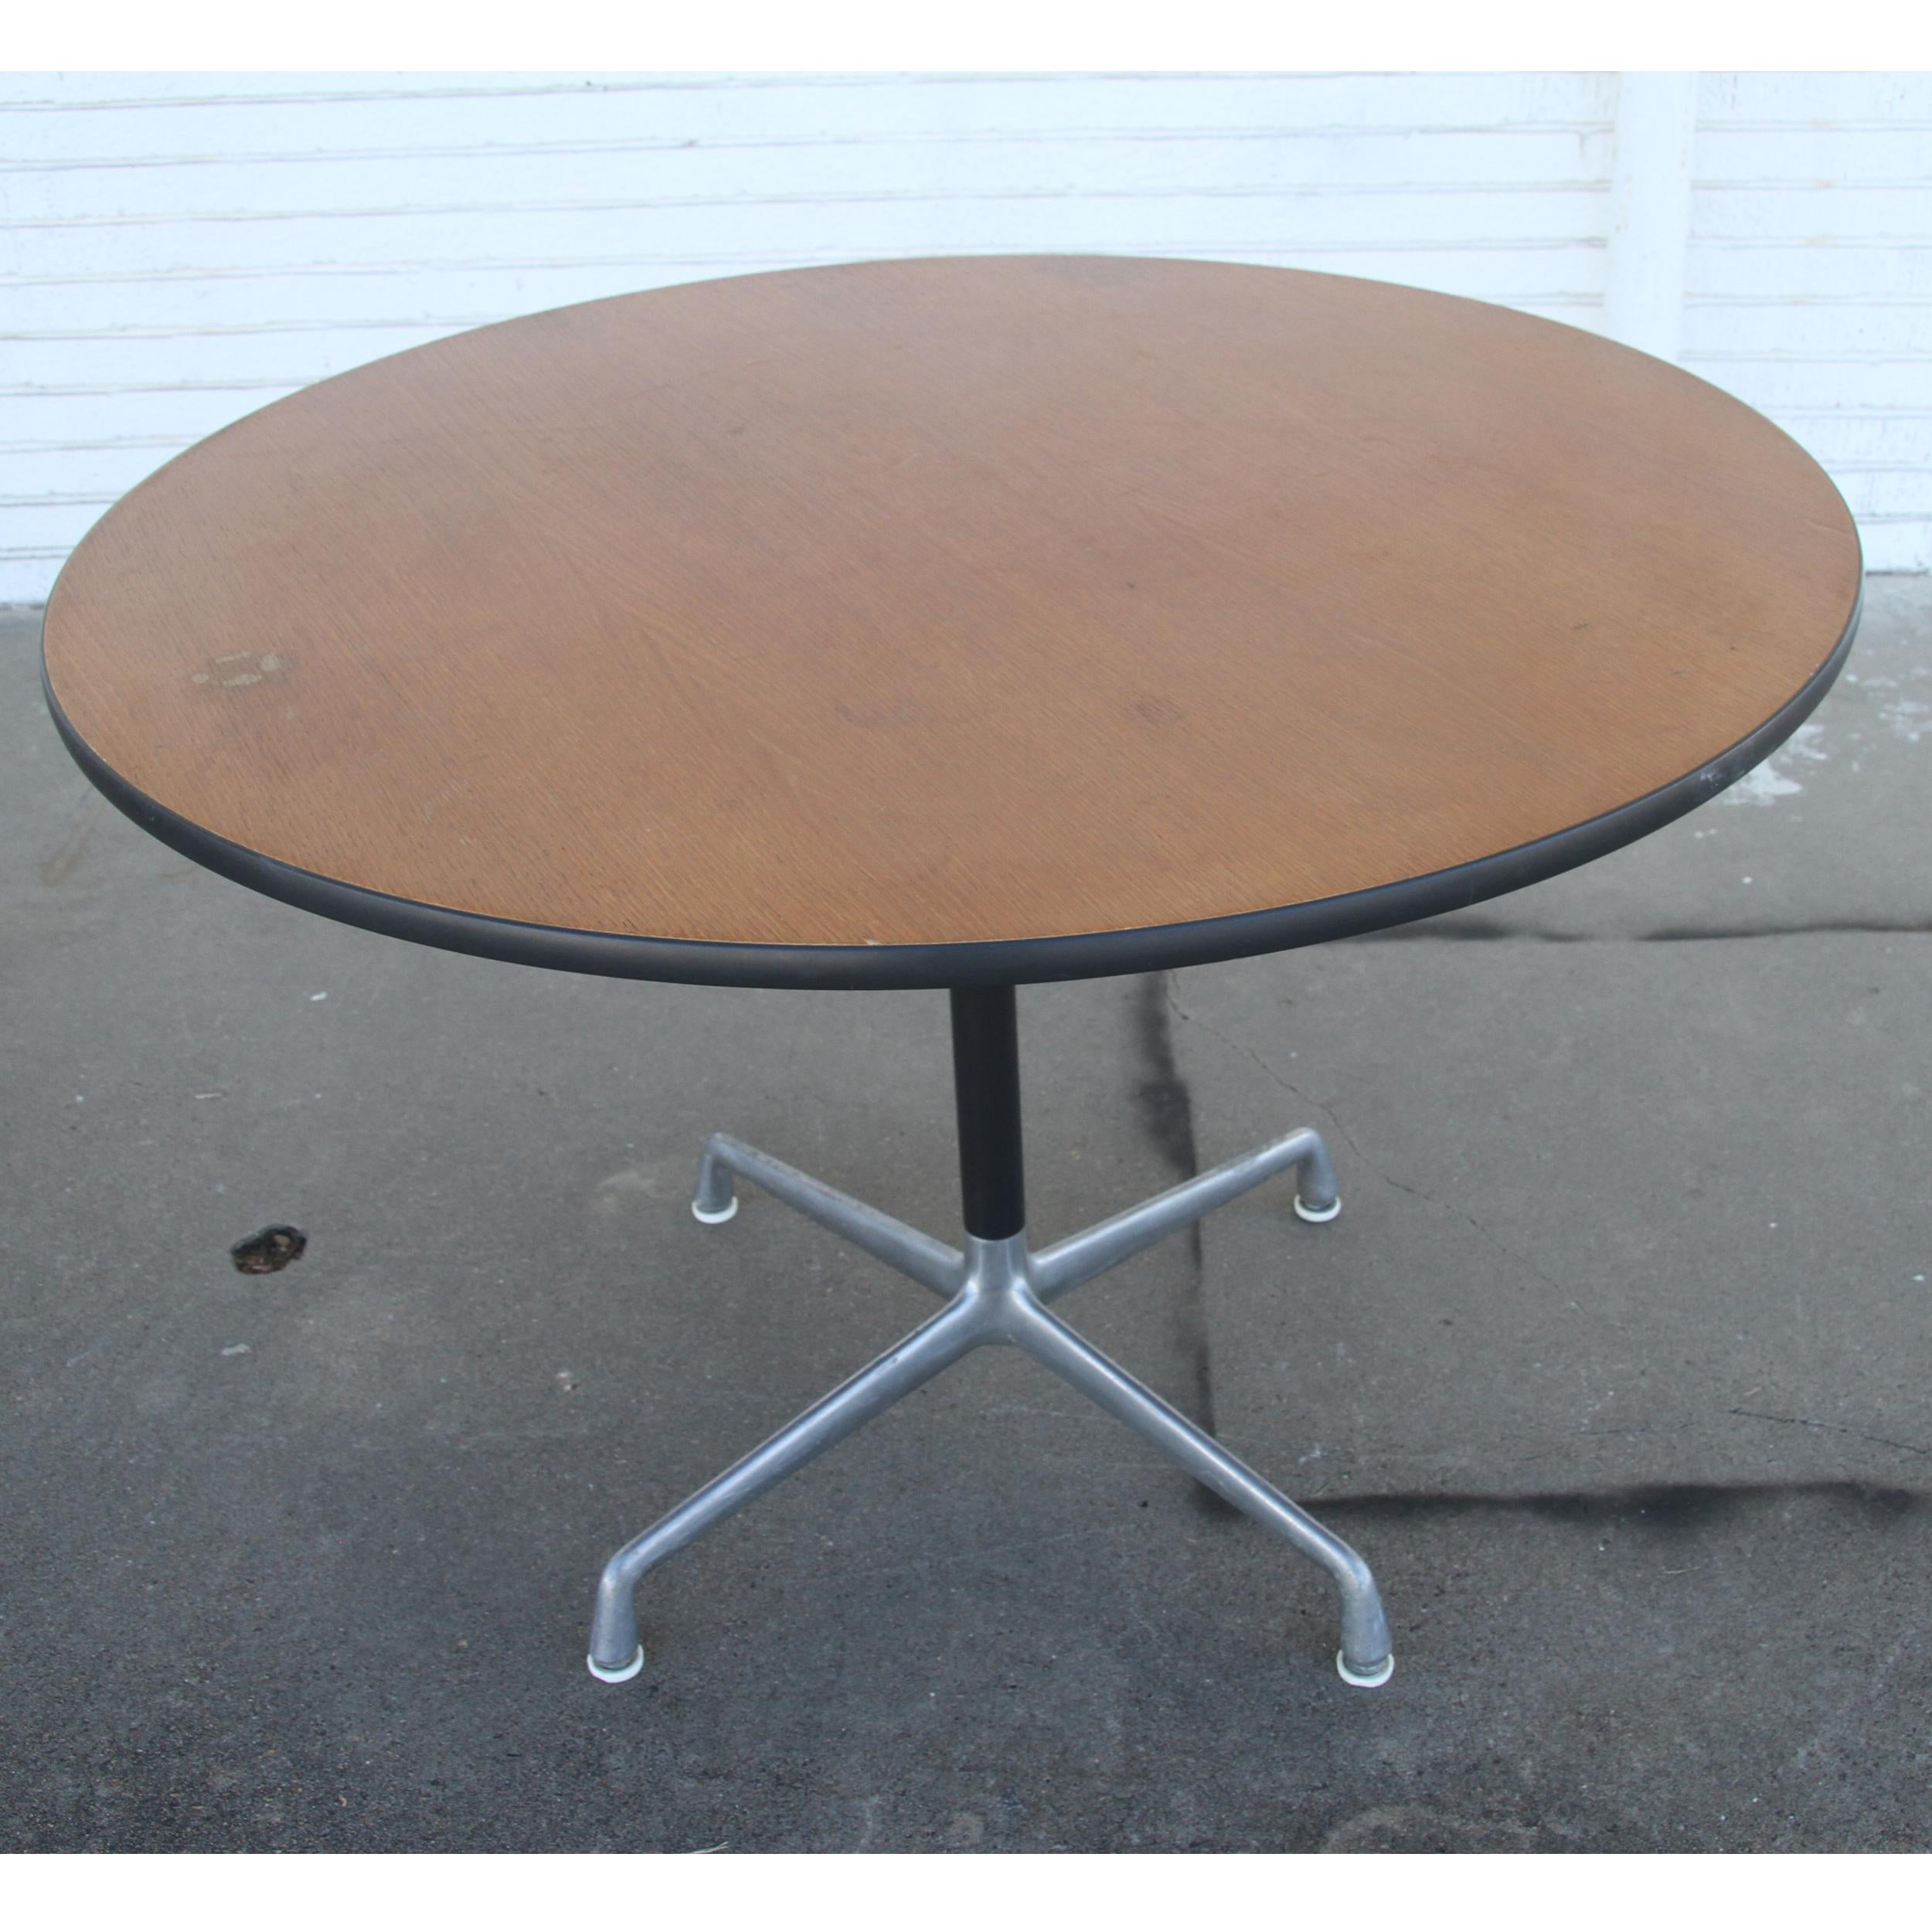 Herman Miller Eames Round Table
Herman Miller Round top with walnut finish , the base is anodized in black with aluminum spider attachment. Great in and office or a home setting .  